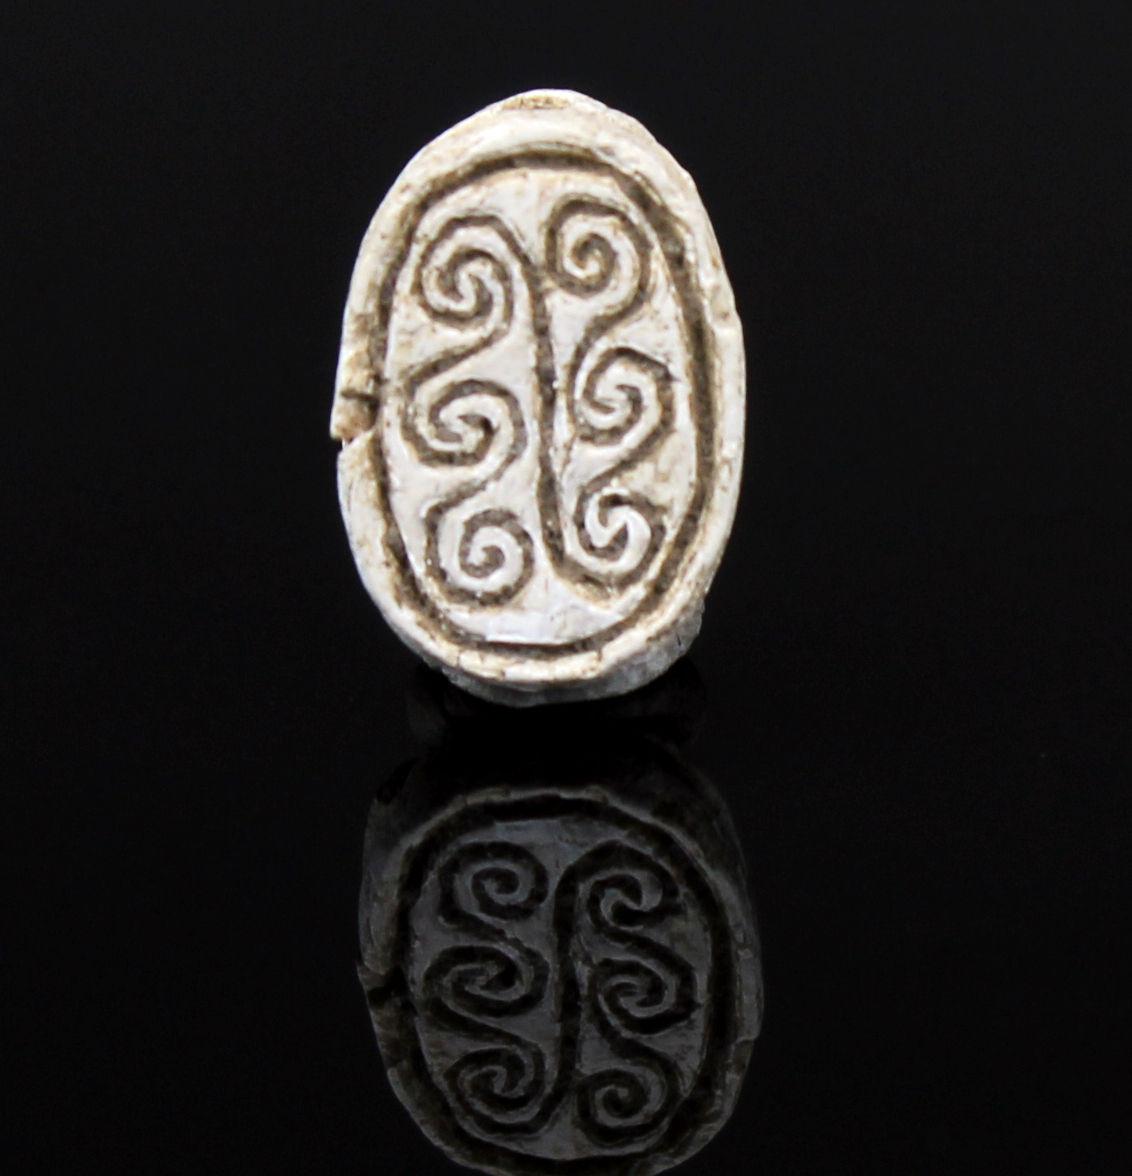 ITEM: Scarab with spiral design
MATERIAL: Steatite
CULTURE: Egyptian
PERIOD: Second Intermediate Period, 1700 – 1550 B.C
DIMENSIONS: 12 mm x 9 mm
CONDITION: Good condition
PROVENANCE: Ex American egyptologist collection, active in the early part of